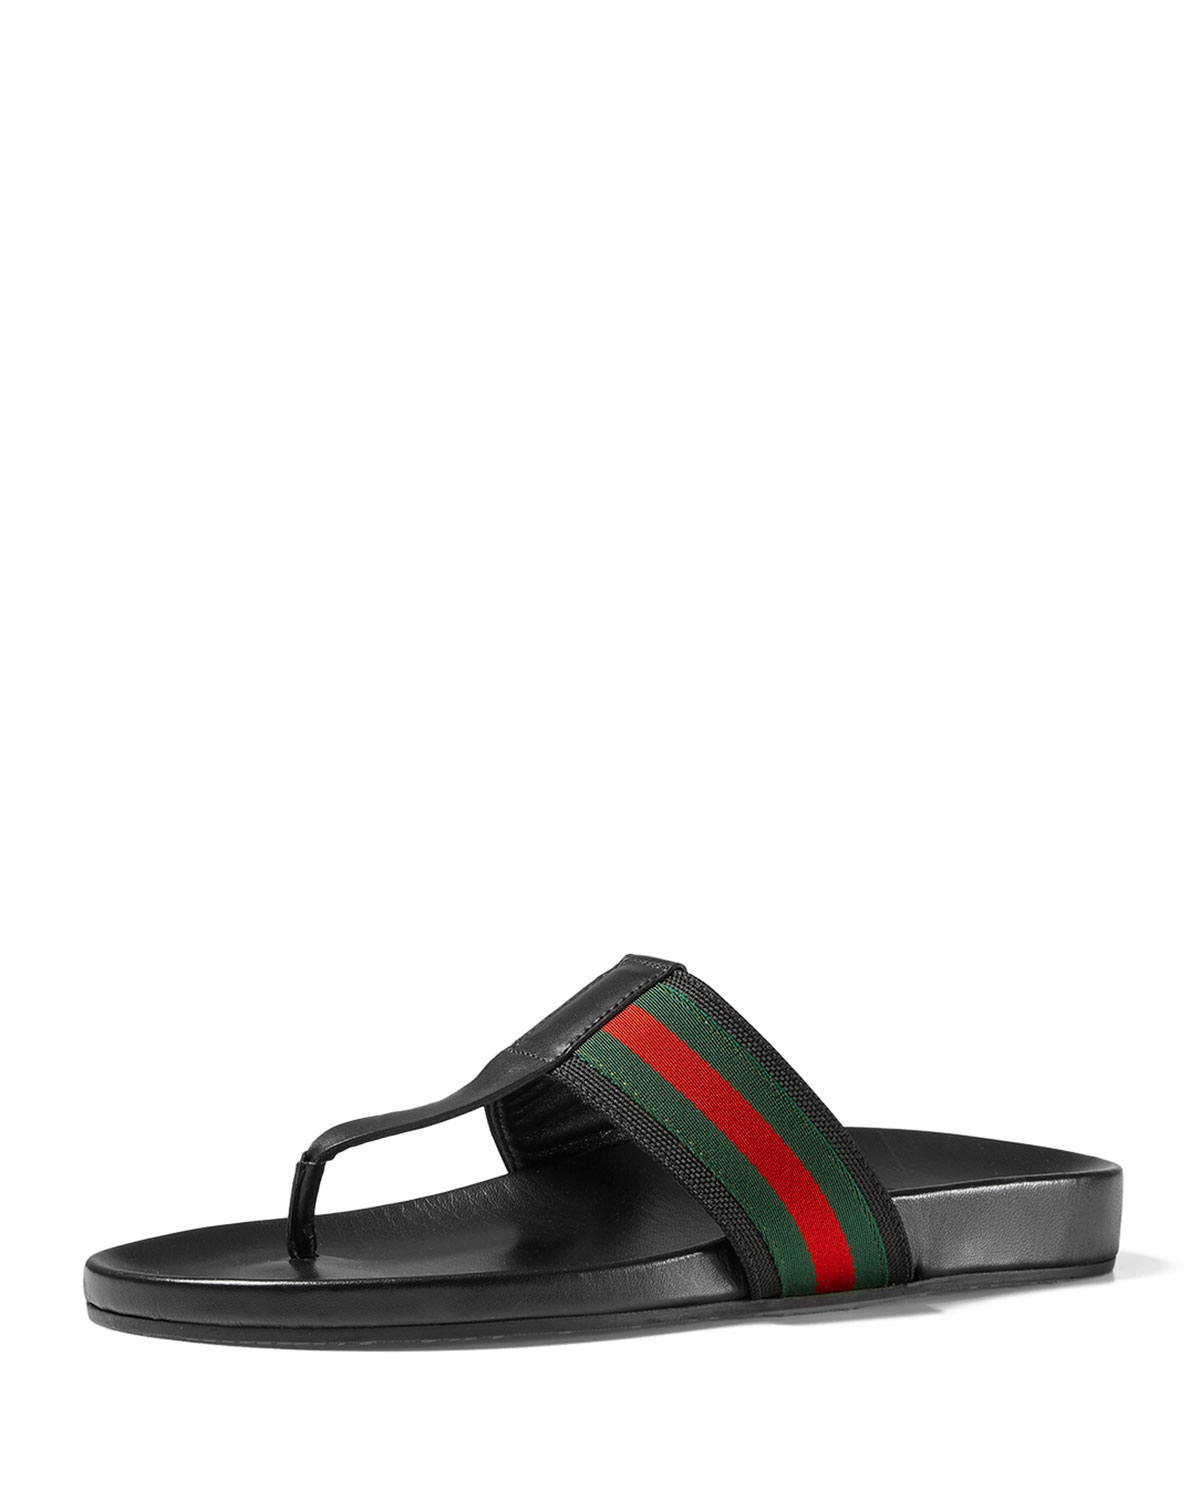  Gucci  Leather Web Strap Sandals  in Black Lyst